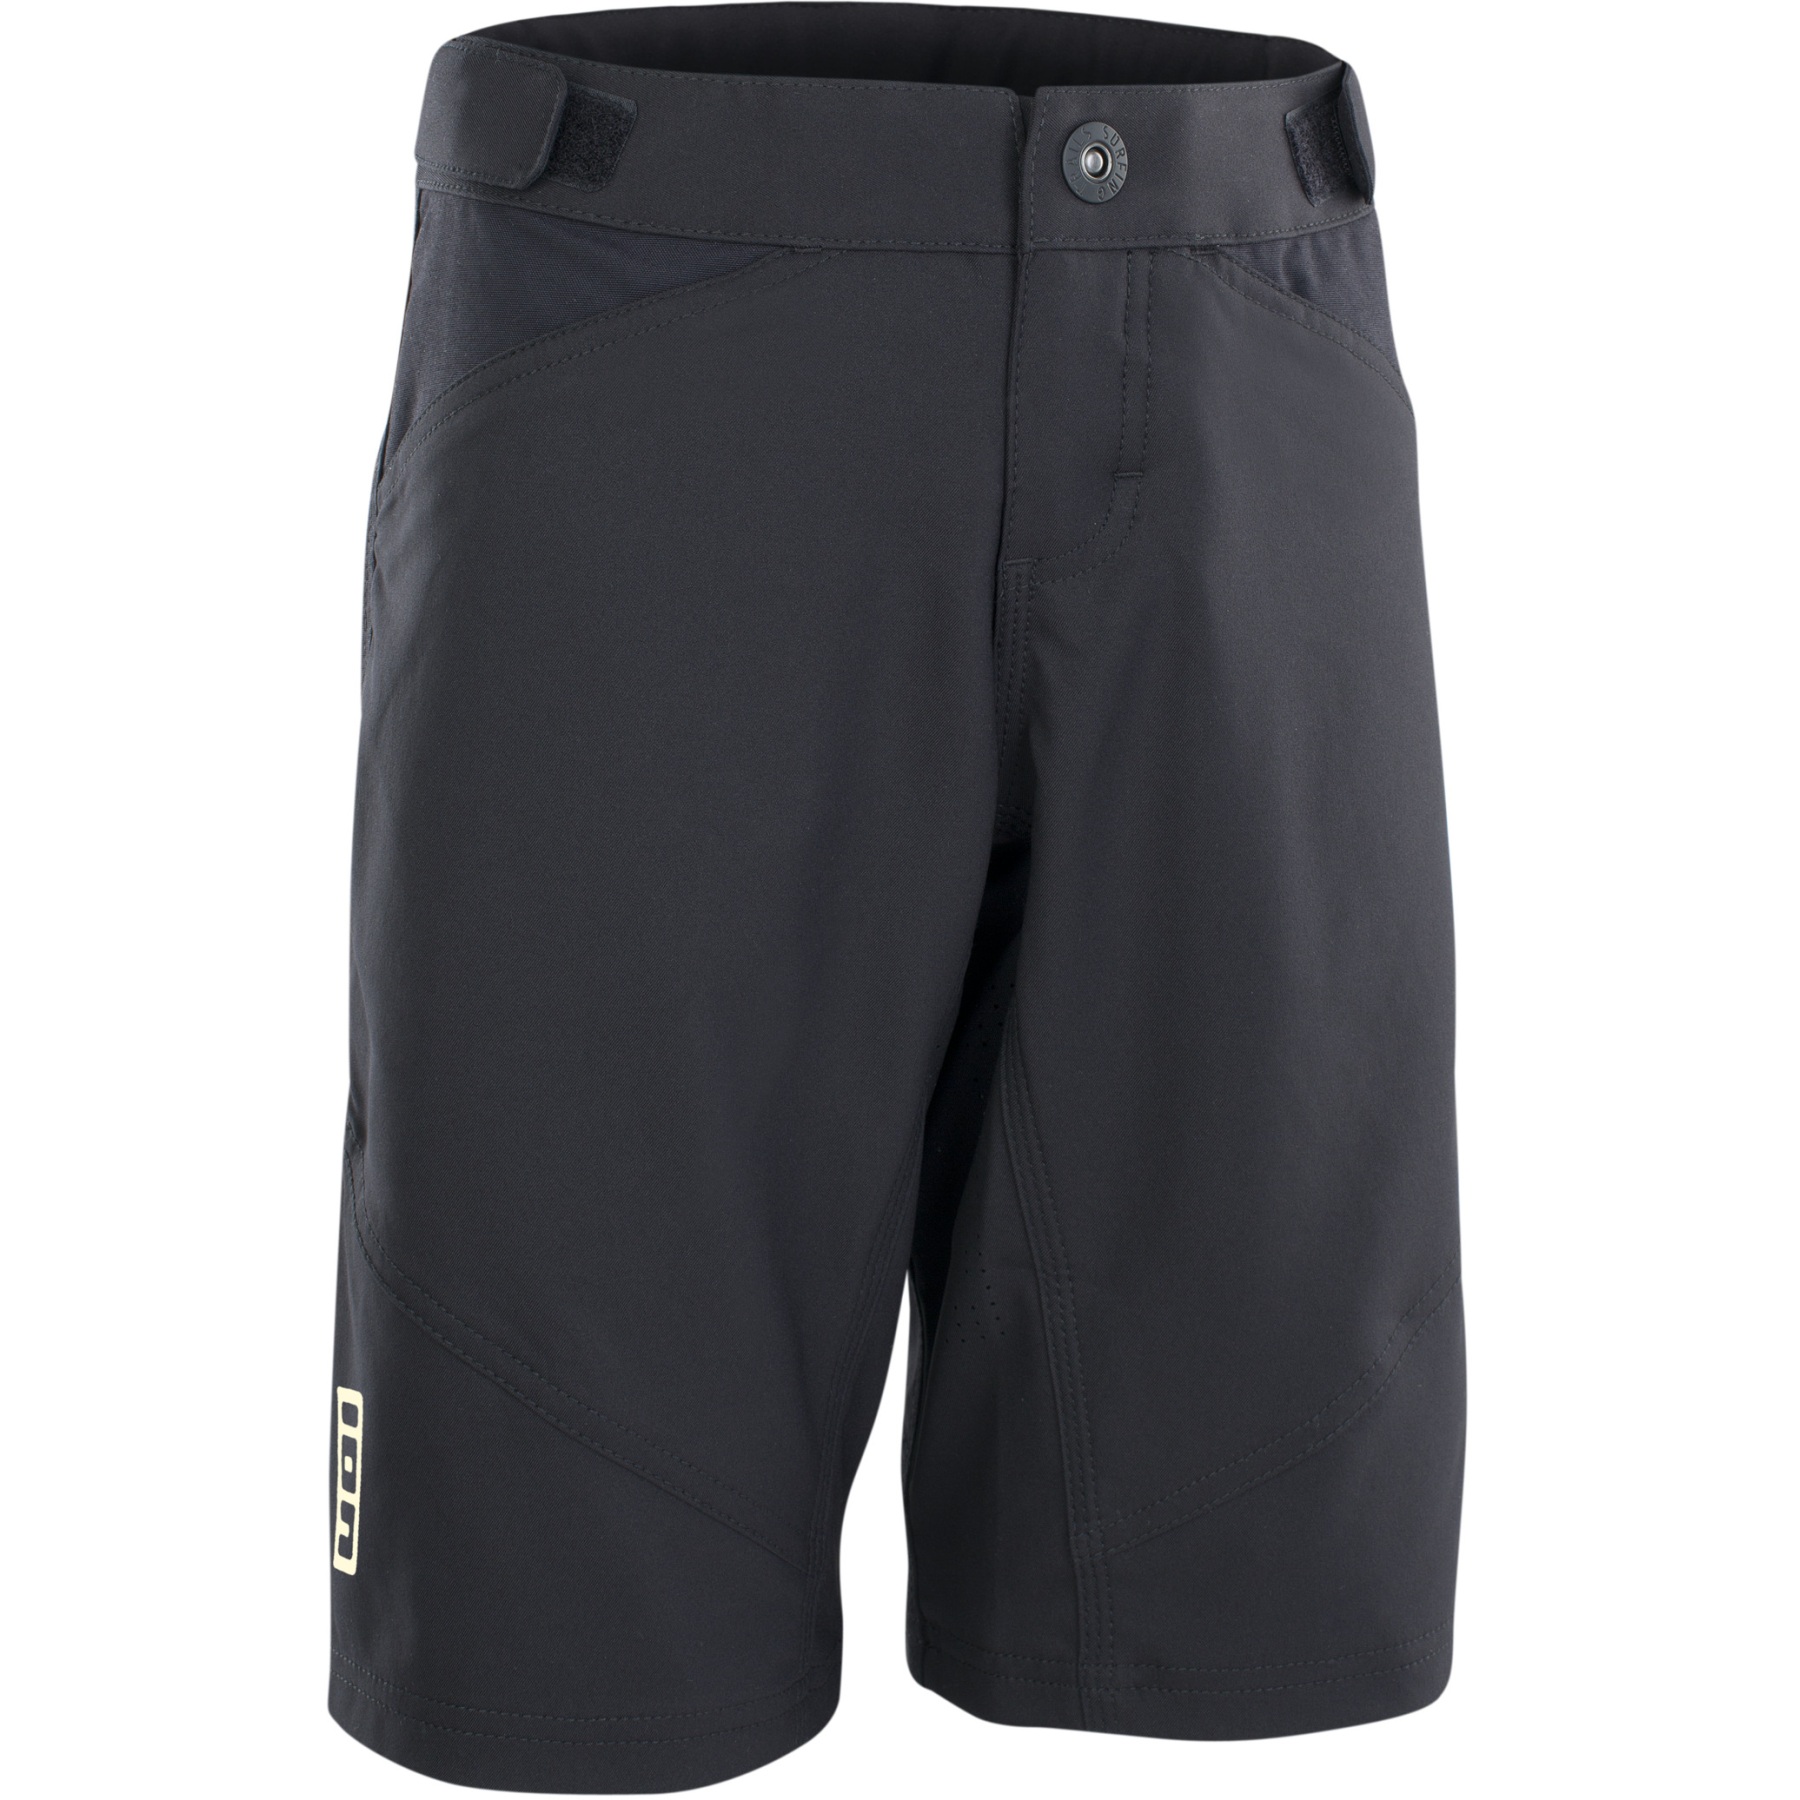 Picture of ION Bike Shorts Scrub Amp Youth - Black 47220